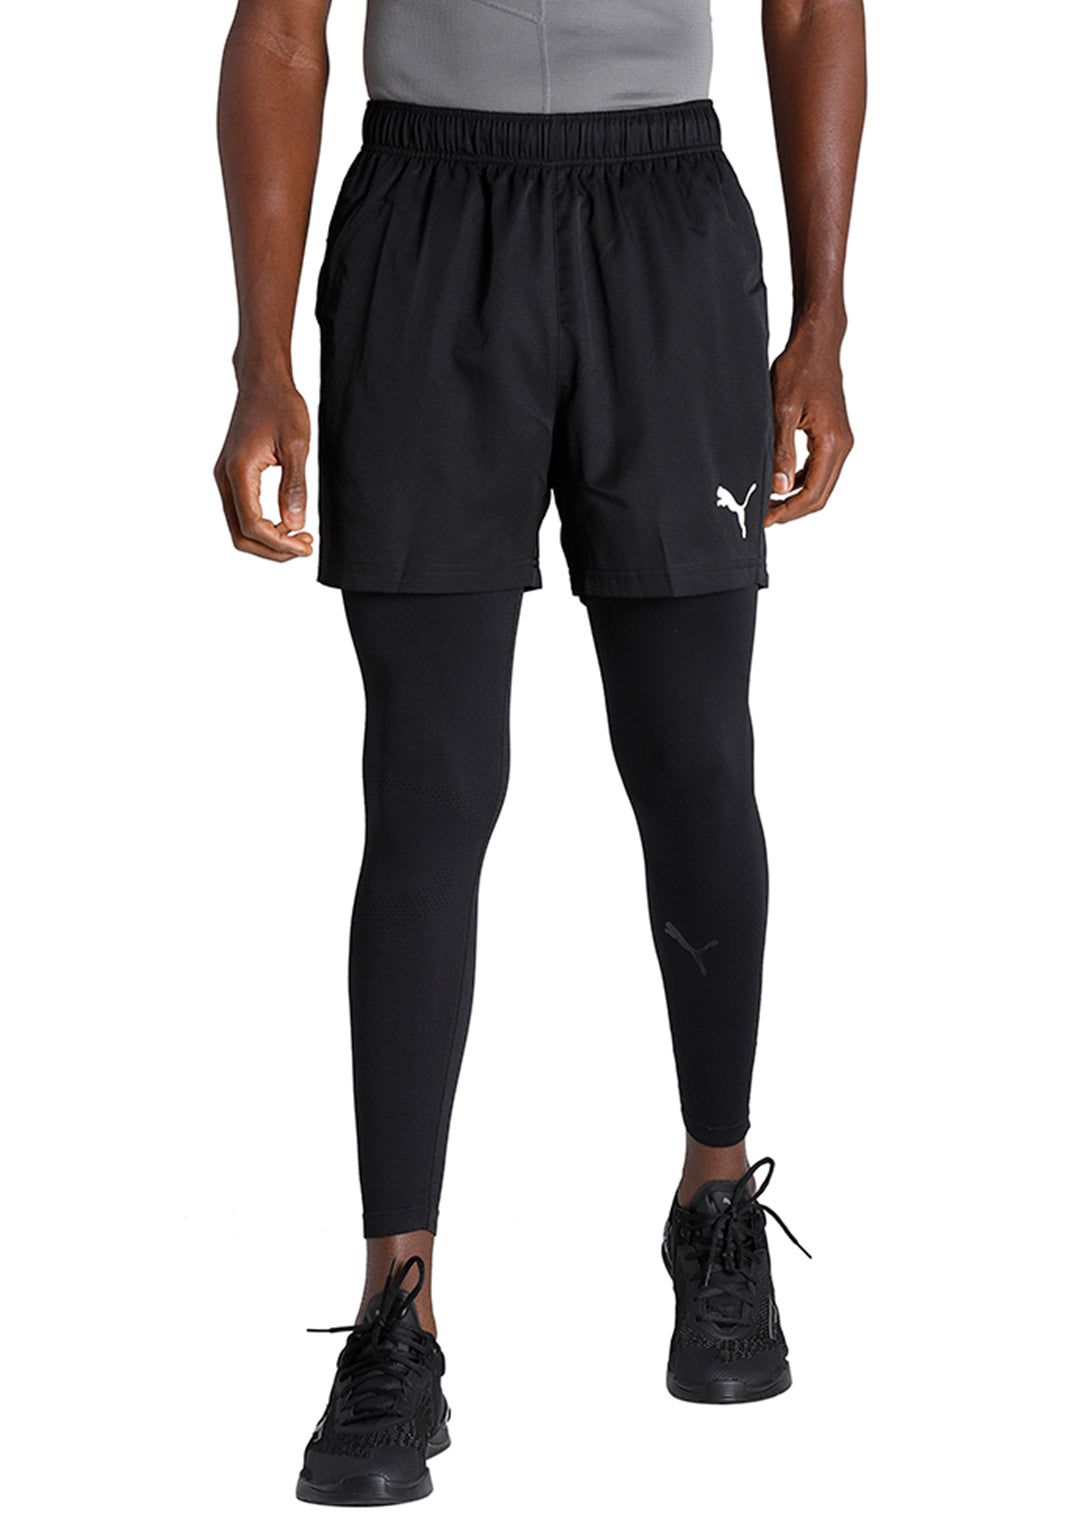 Buy Men Puma Black Solid Active Woven Shorts From Fancode